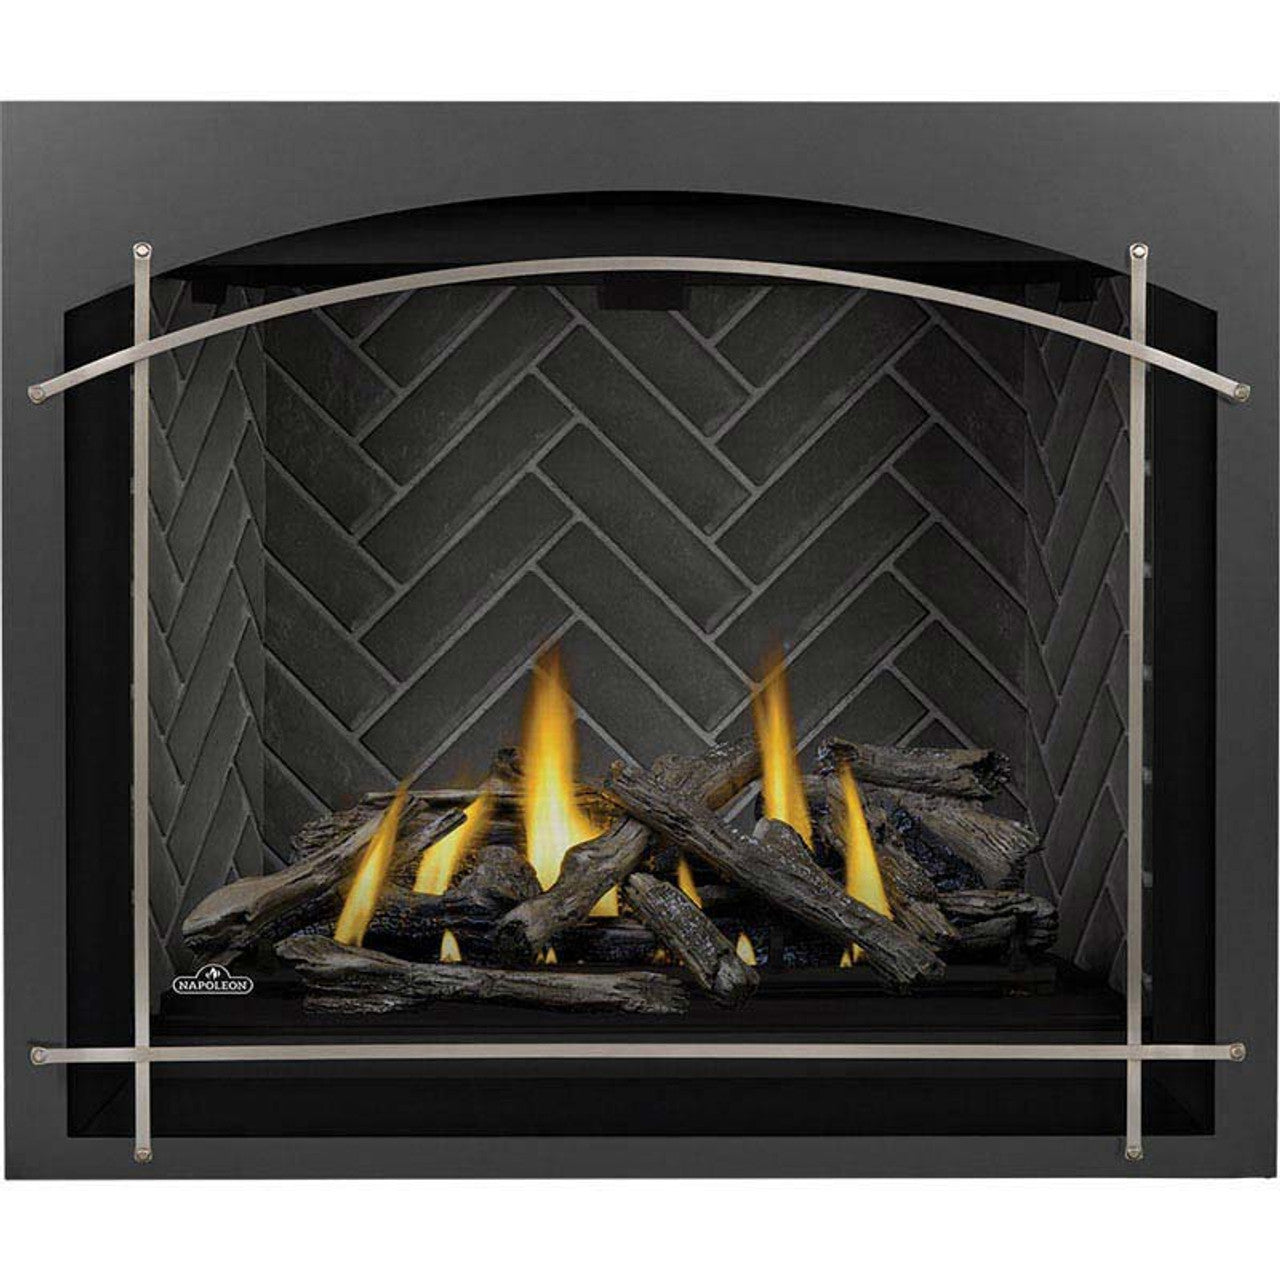 Napoleon Altitude X Direct Vent 42" Propane Gas Fireplace - AX42PTE-1 - Chimney Cricket